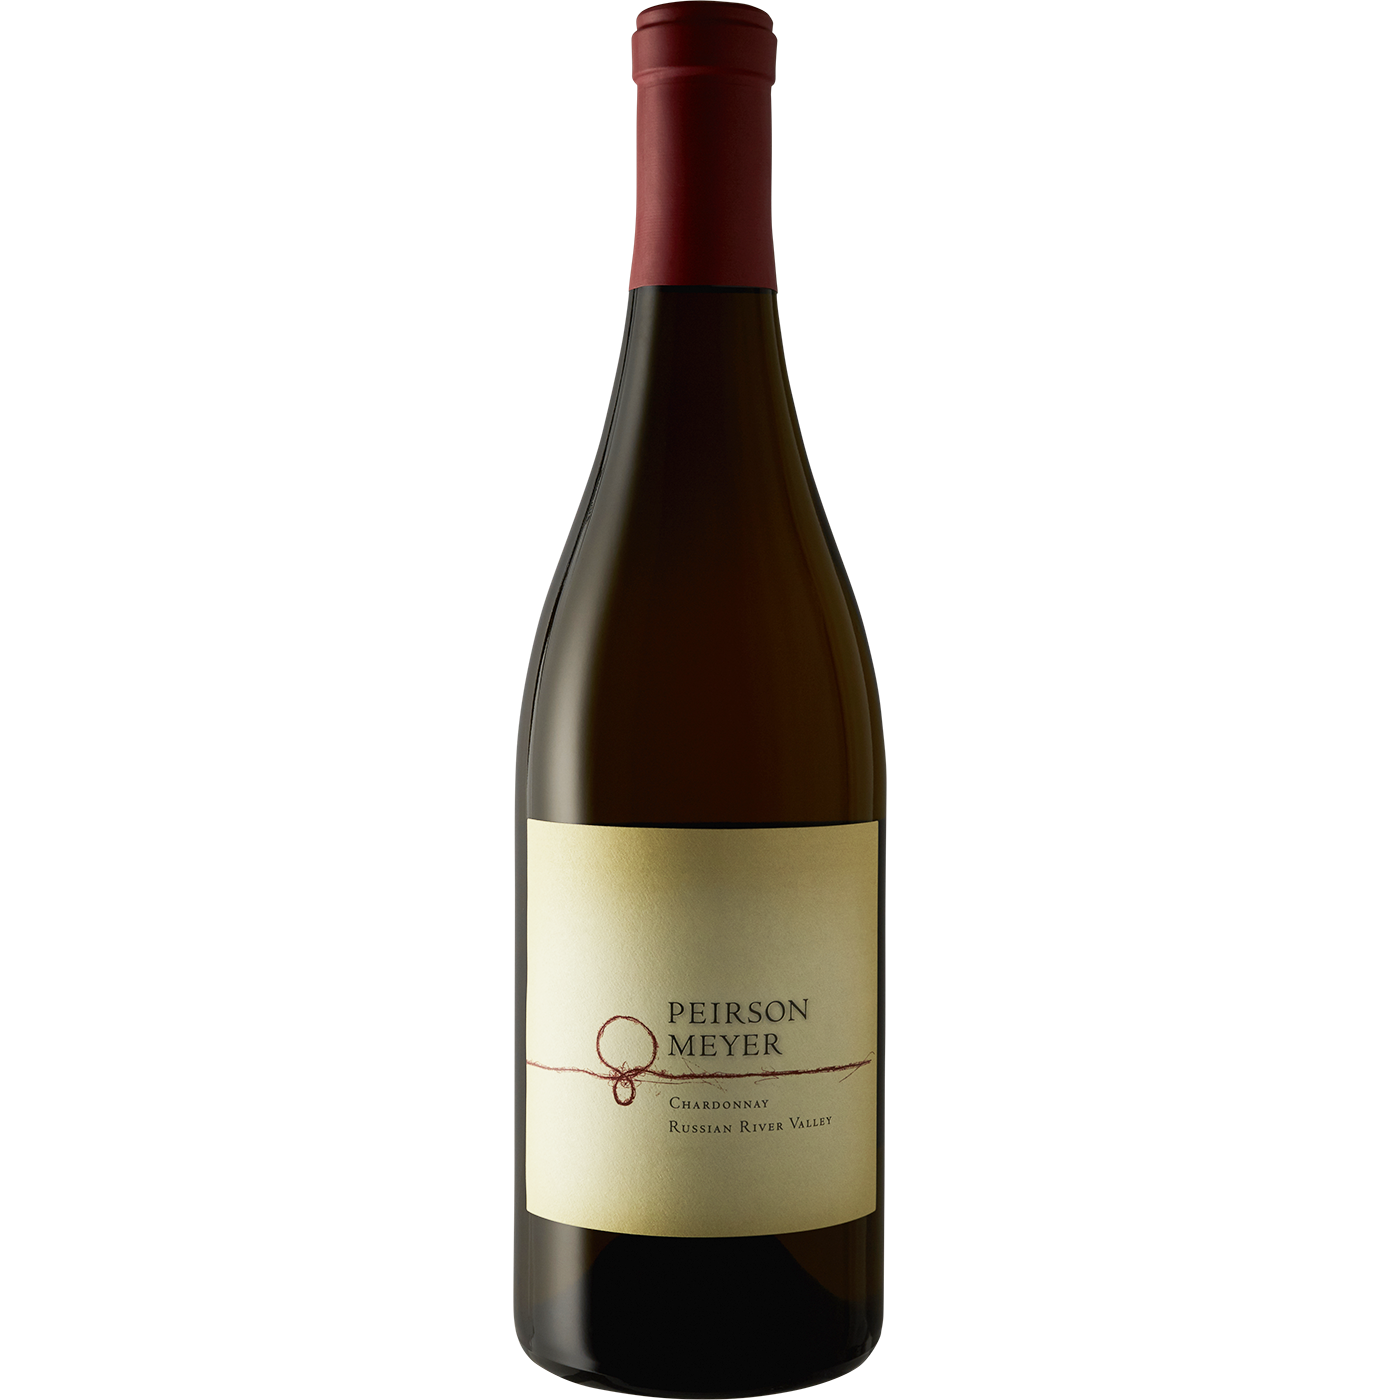 Peirson Meyer Chardonnay Russian River Valley 2017